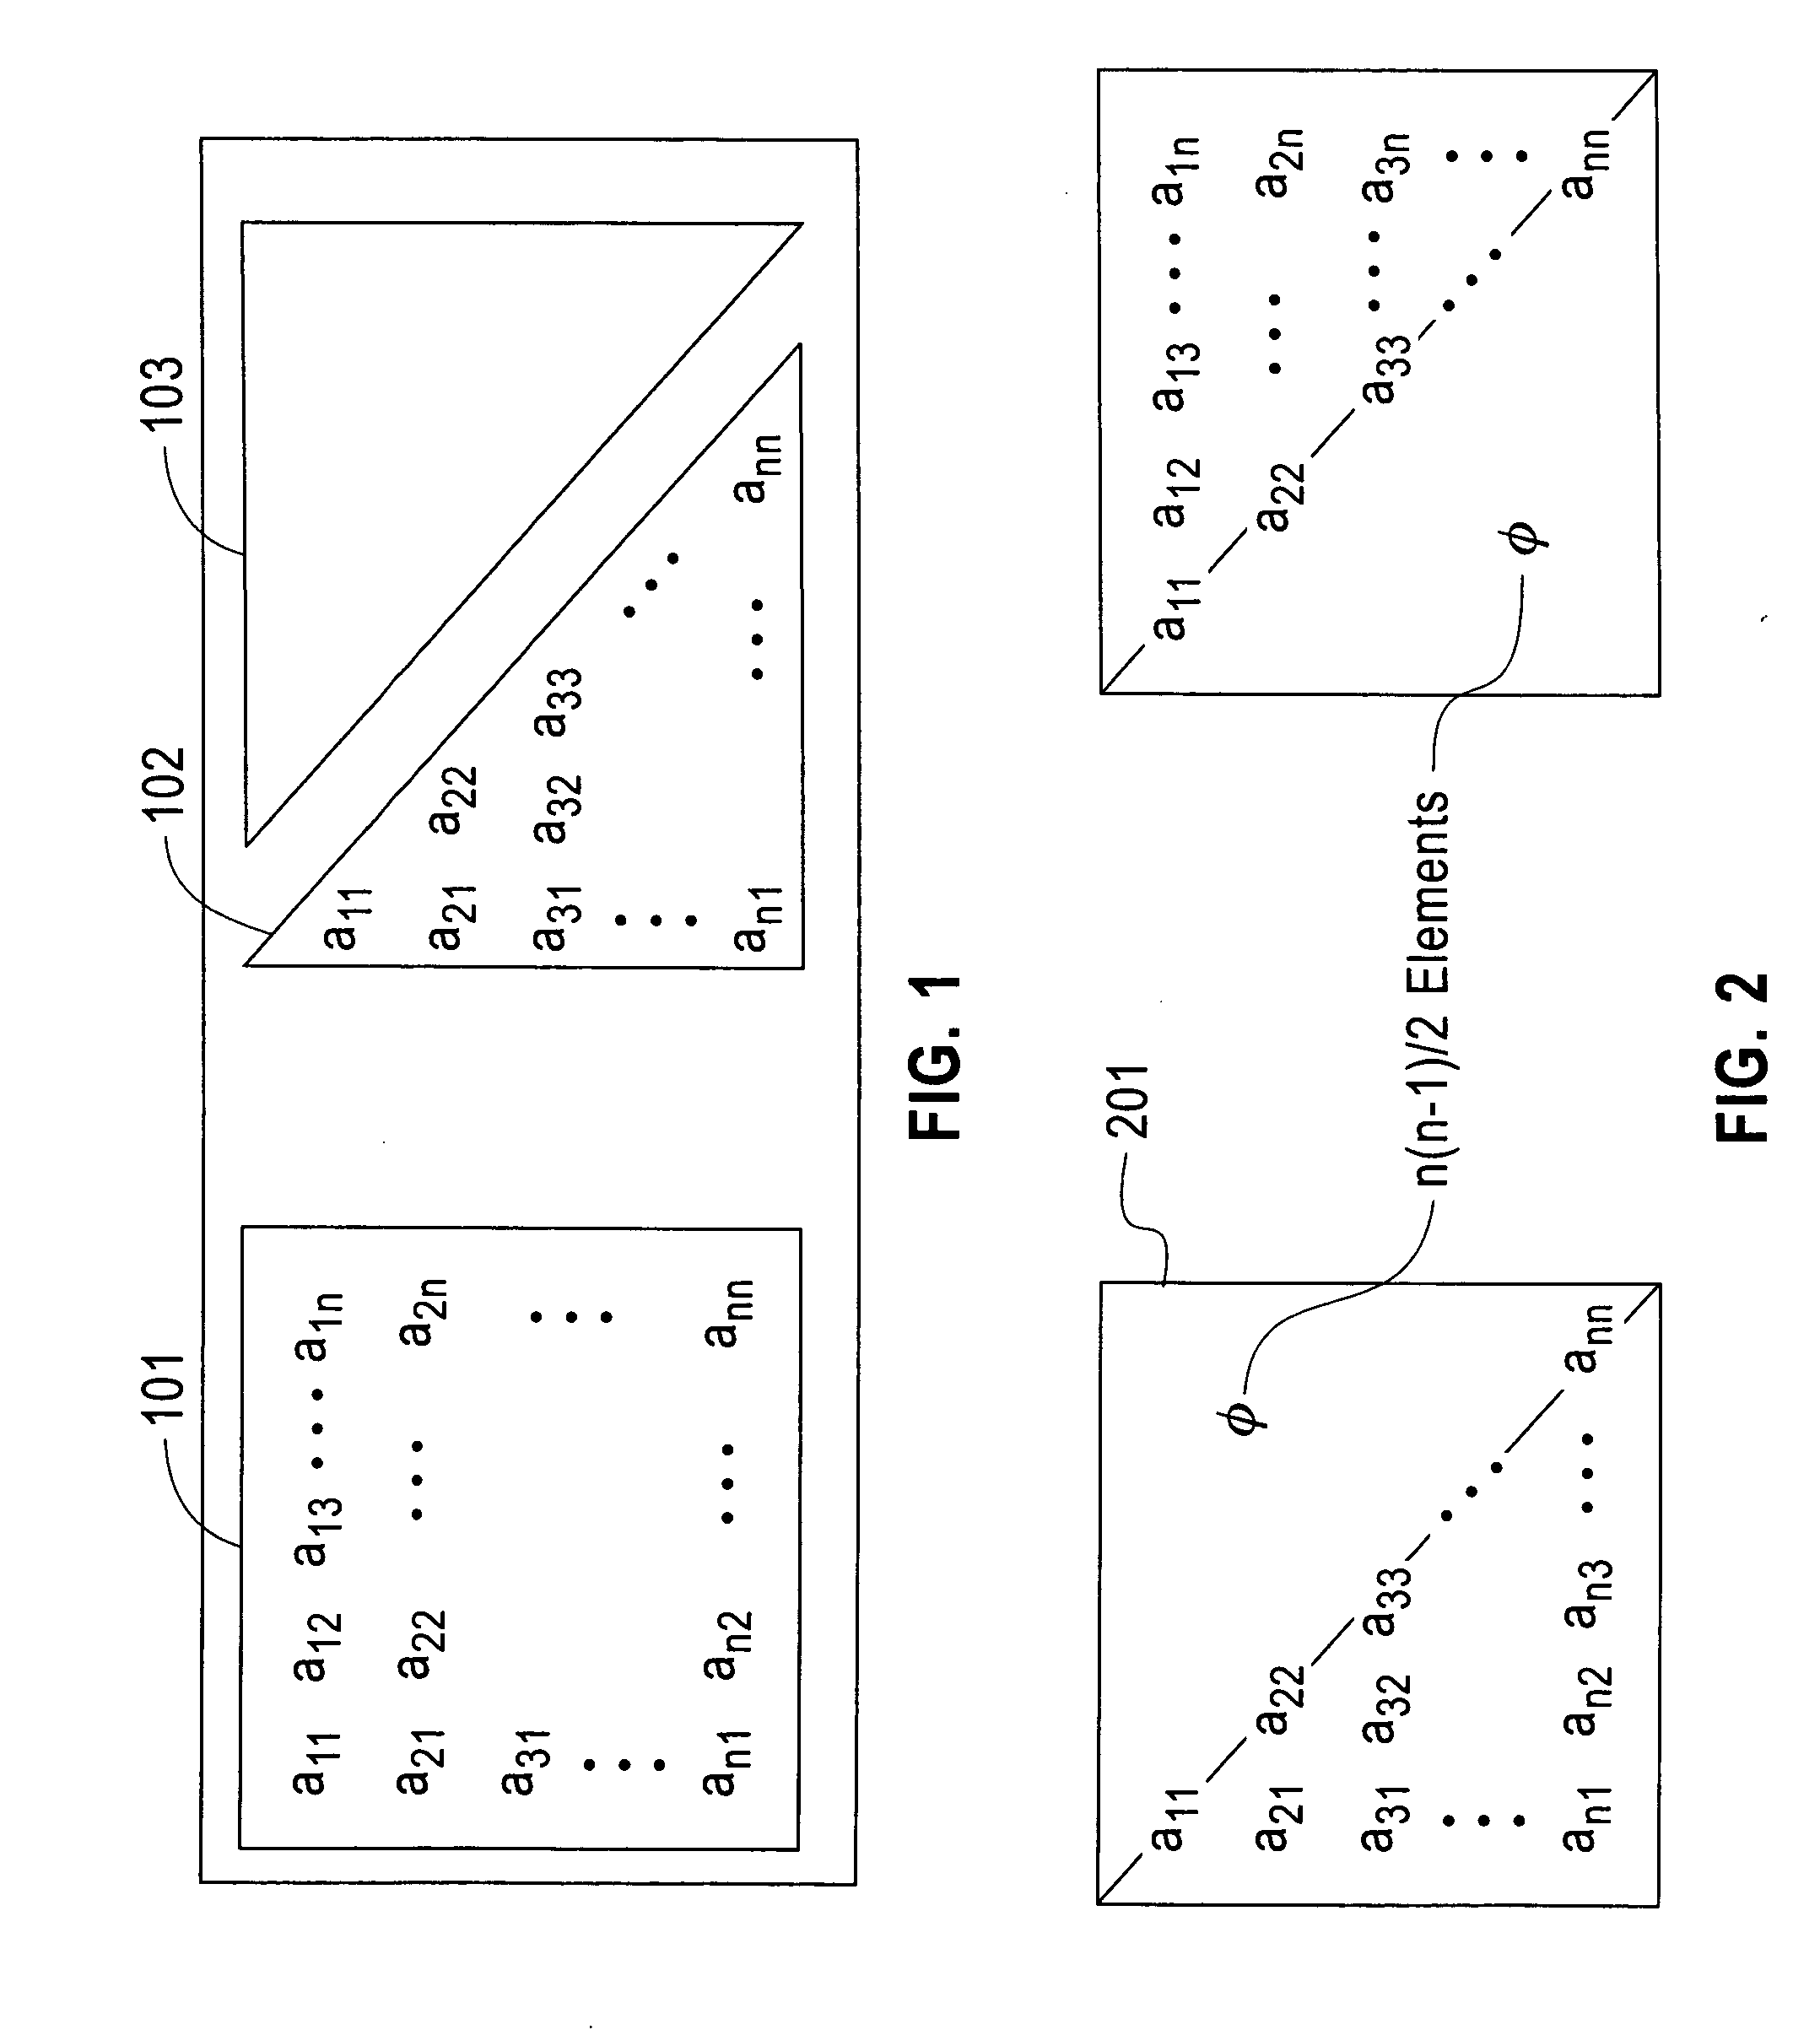 Method and structure for improving processing efficiency in parallel processing machines for rectangular and triangular matrix routines